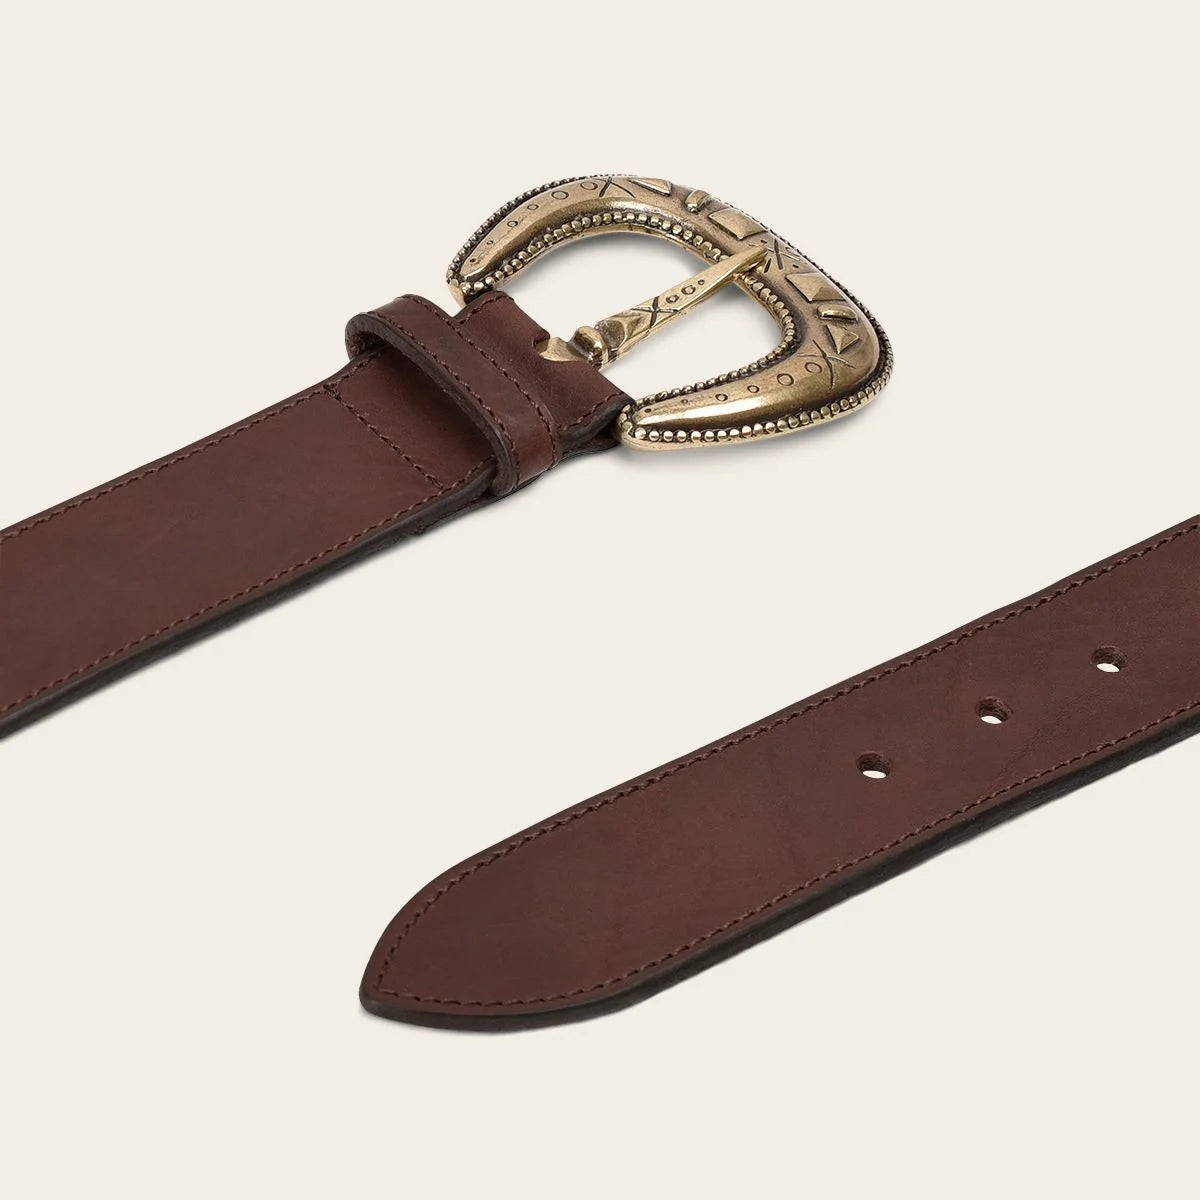 Casual brown leather cowboy belt